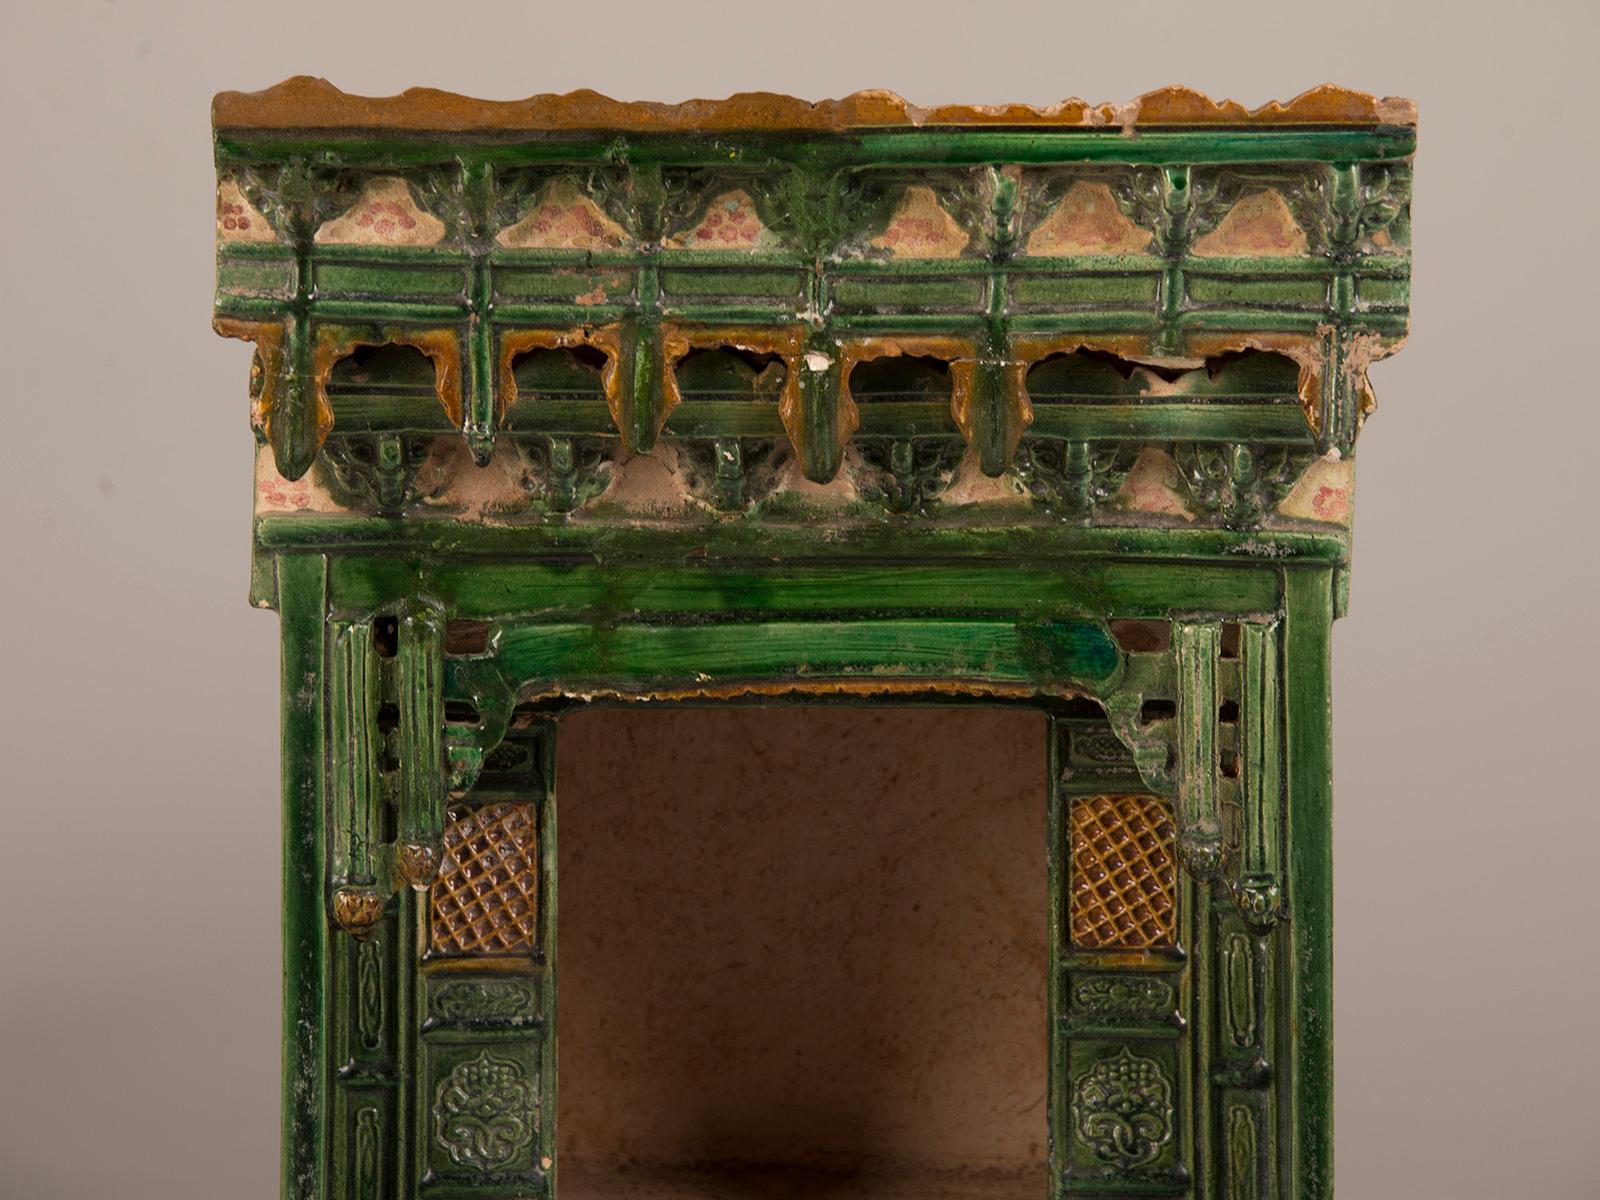 A green and ochre antique Chinese glazed earthenware wedding bed roof tile from the Ming dynasty in China circa 1368-1644. Originally used where the roof lines met, this piece represented the peace and harmony of a happy marriage. The brilliant